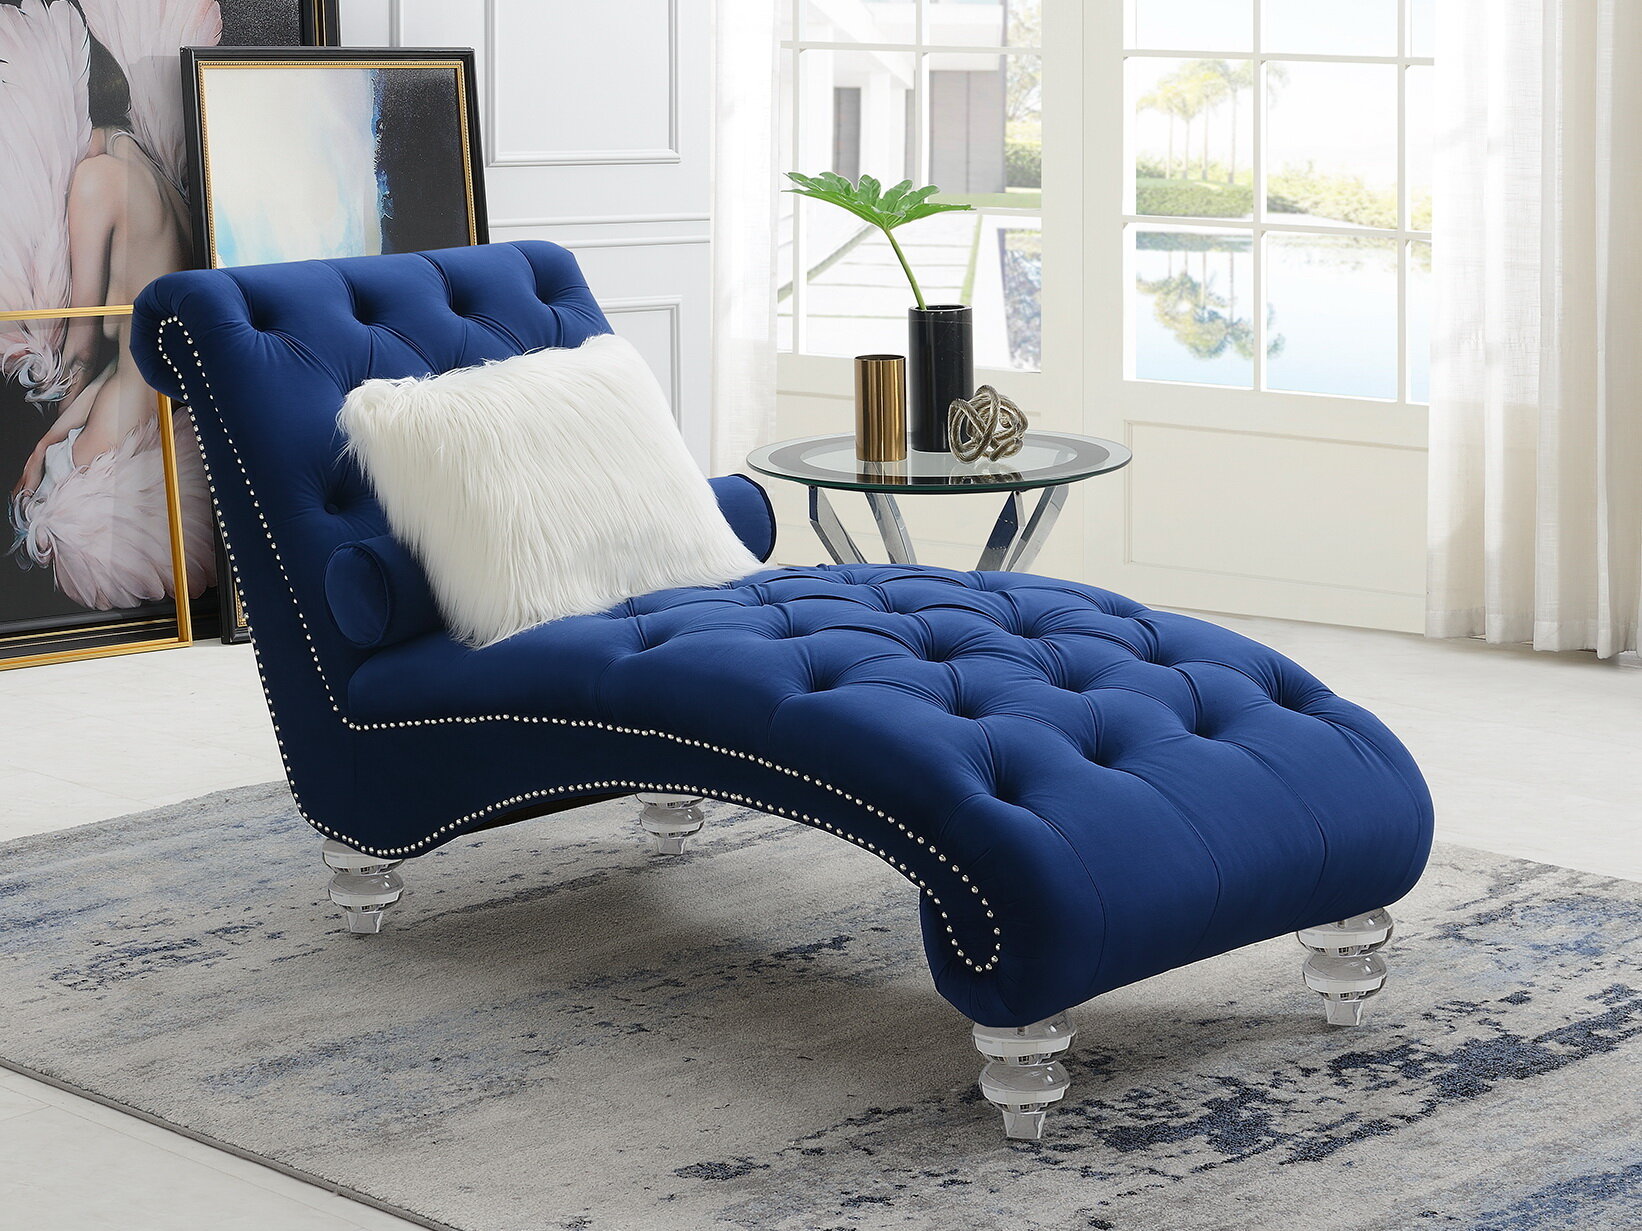 Trotwood Upholstered Chaise Lounge